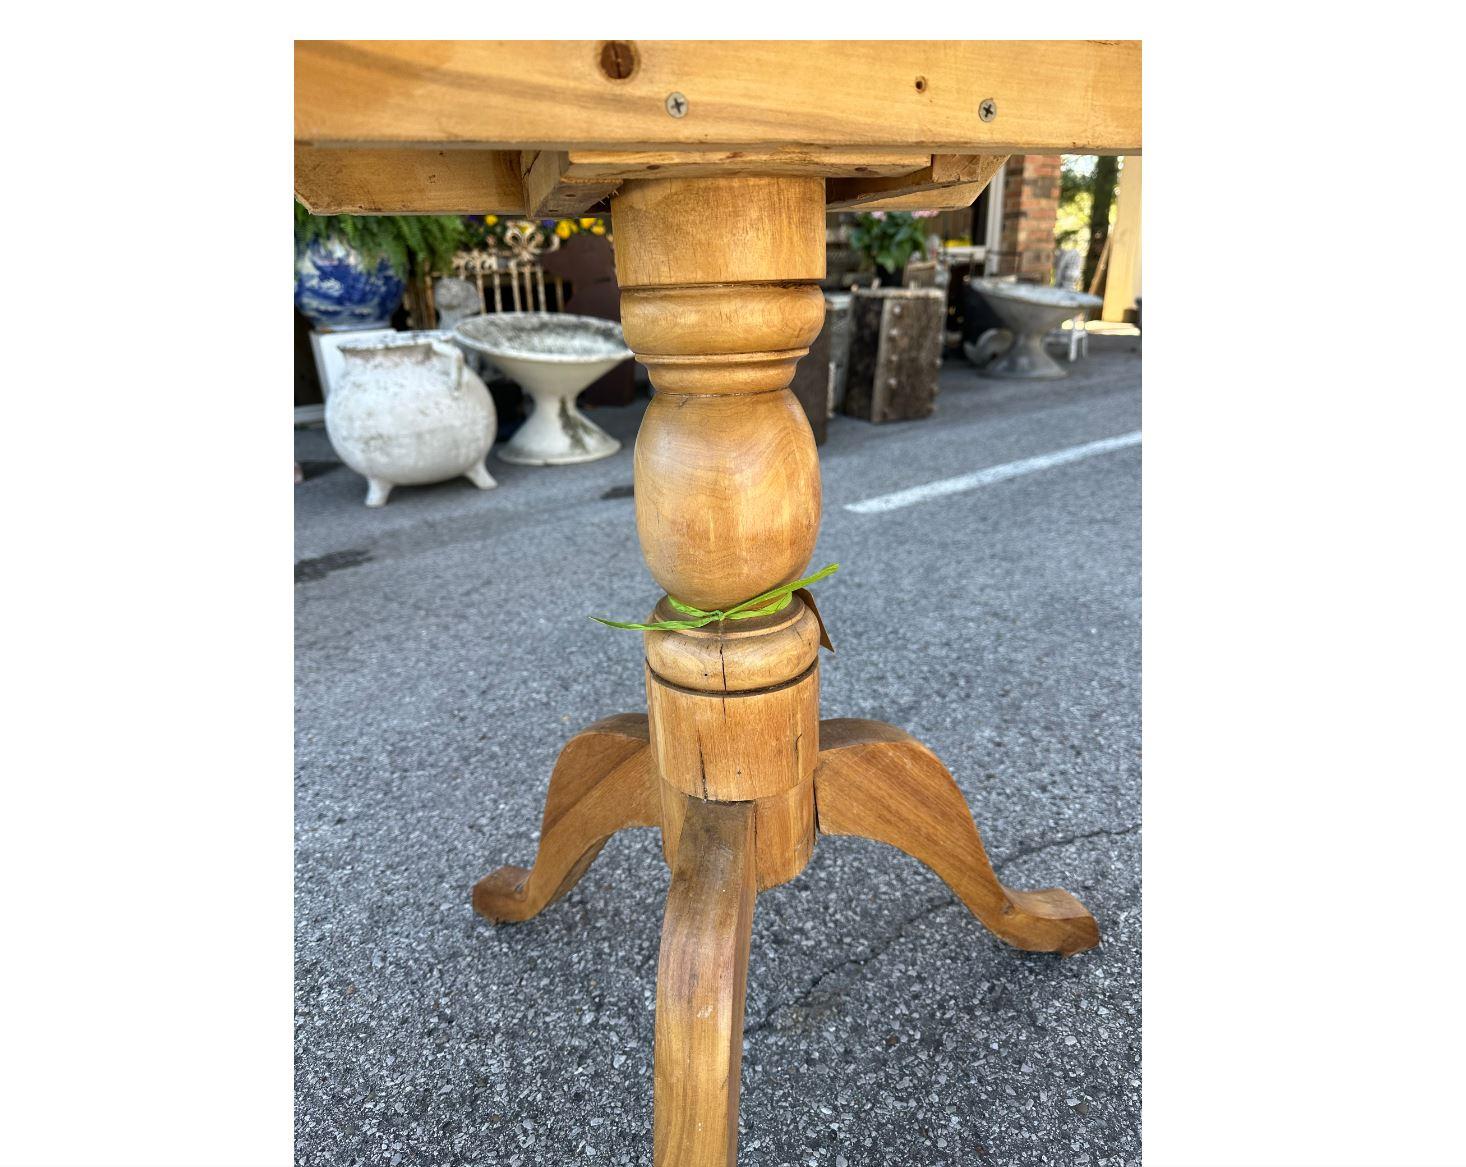 This is beautiful little English pine side table! It has a turned, pedestal design with 3 lovely curved legs. The old English pine gives this piece such a nice warm wood tone. There is lovely natural design in the pine top as well! Versatile enough